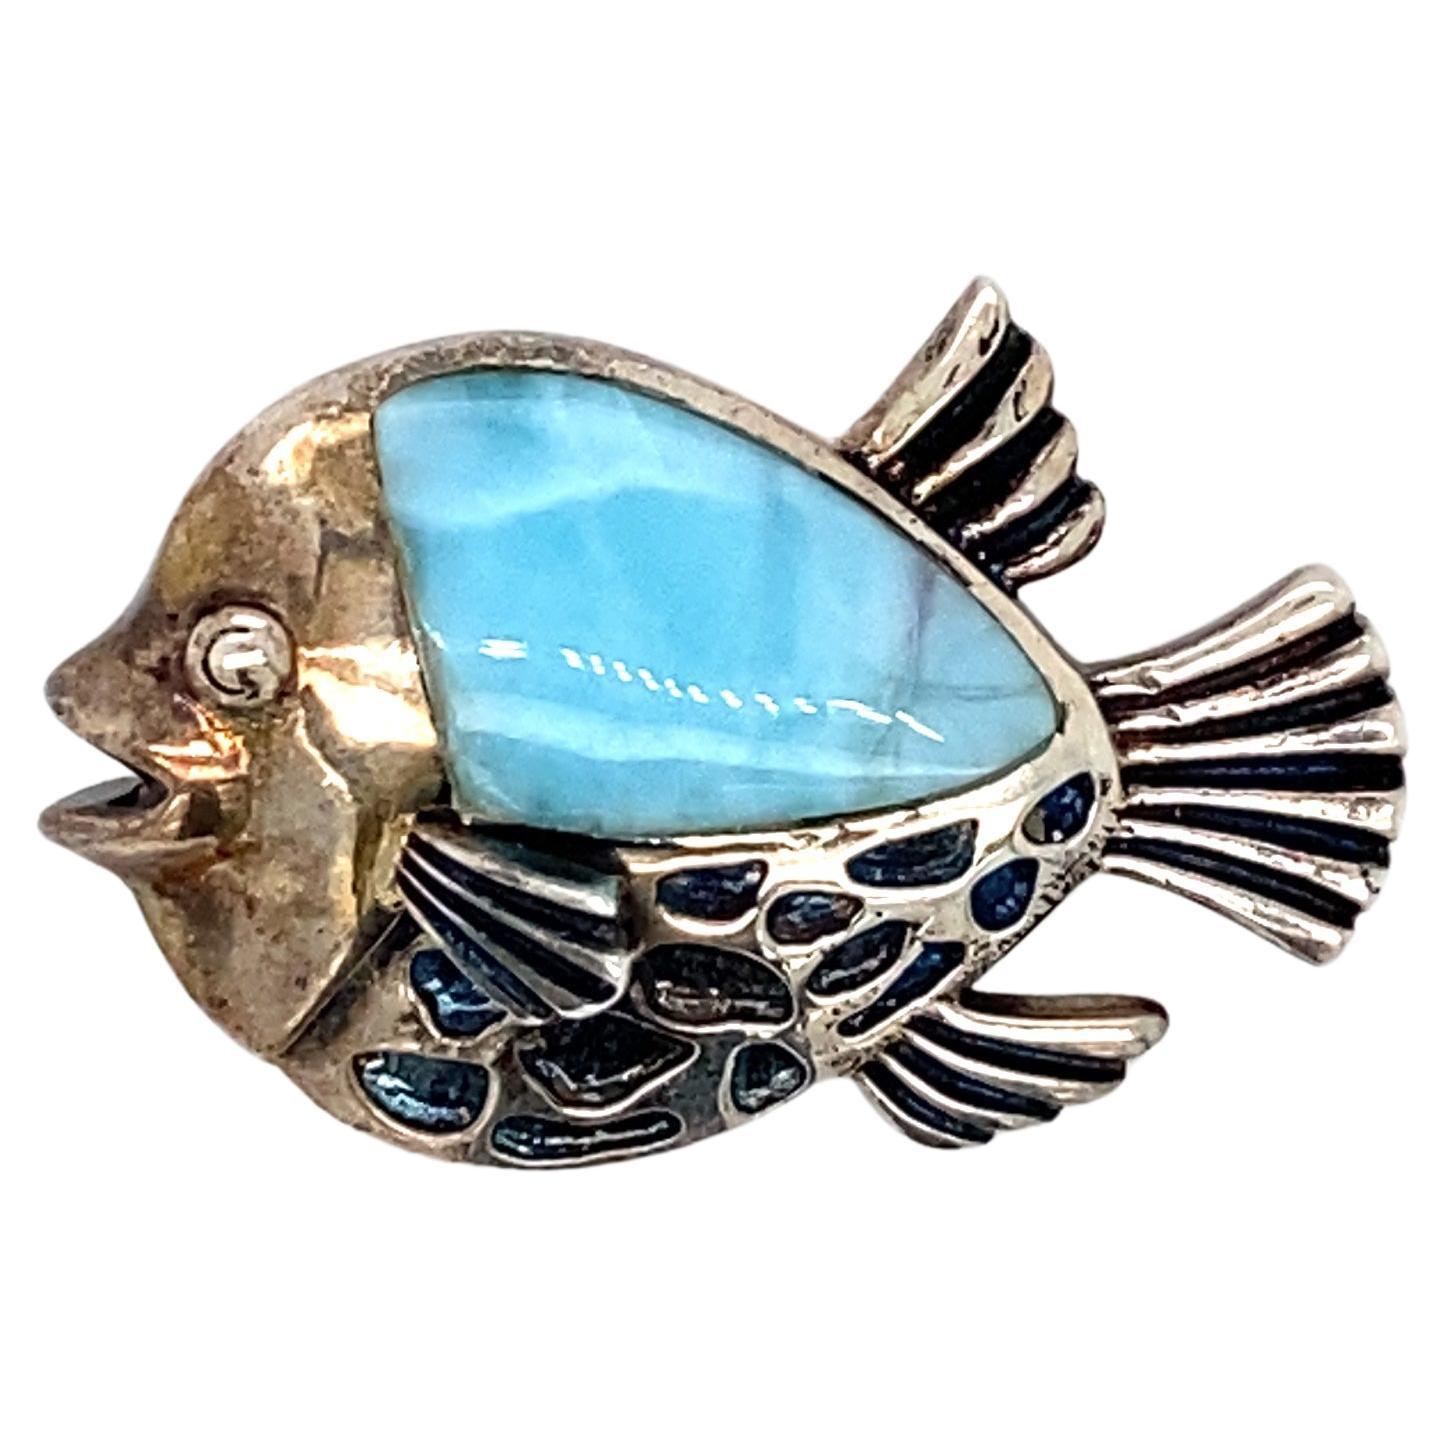 Circa 1990s Enamel Fish Pendant with Larimar in Sterling Silver For Sale